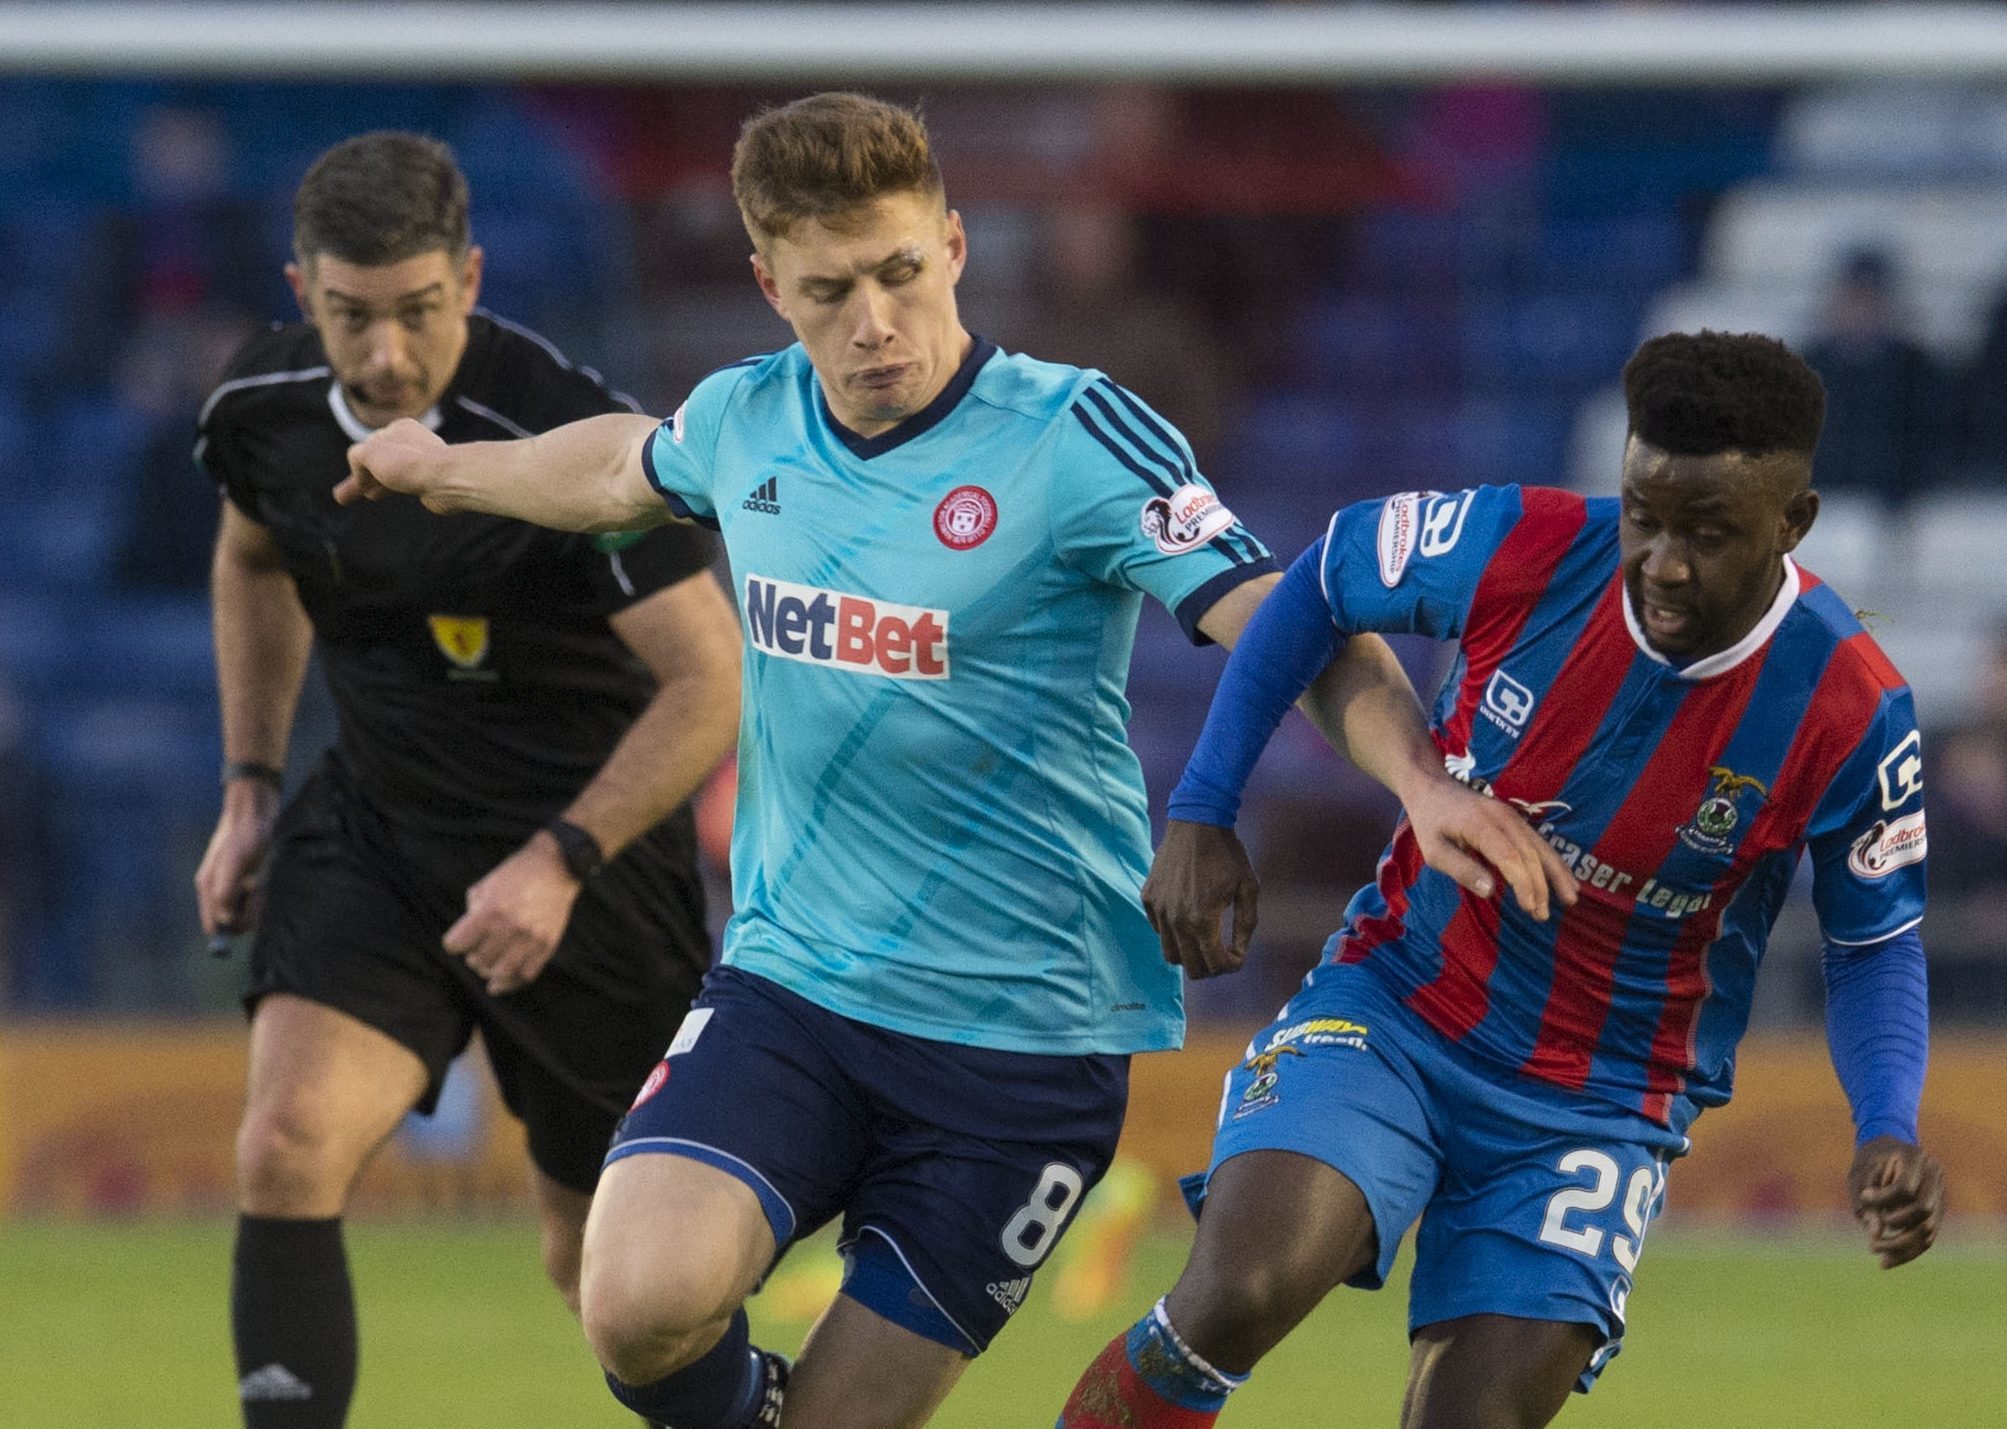 Larnell Cole has impressed for Caley Thistle in recent weeks.